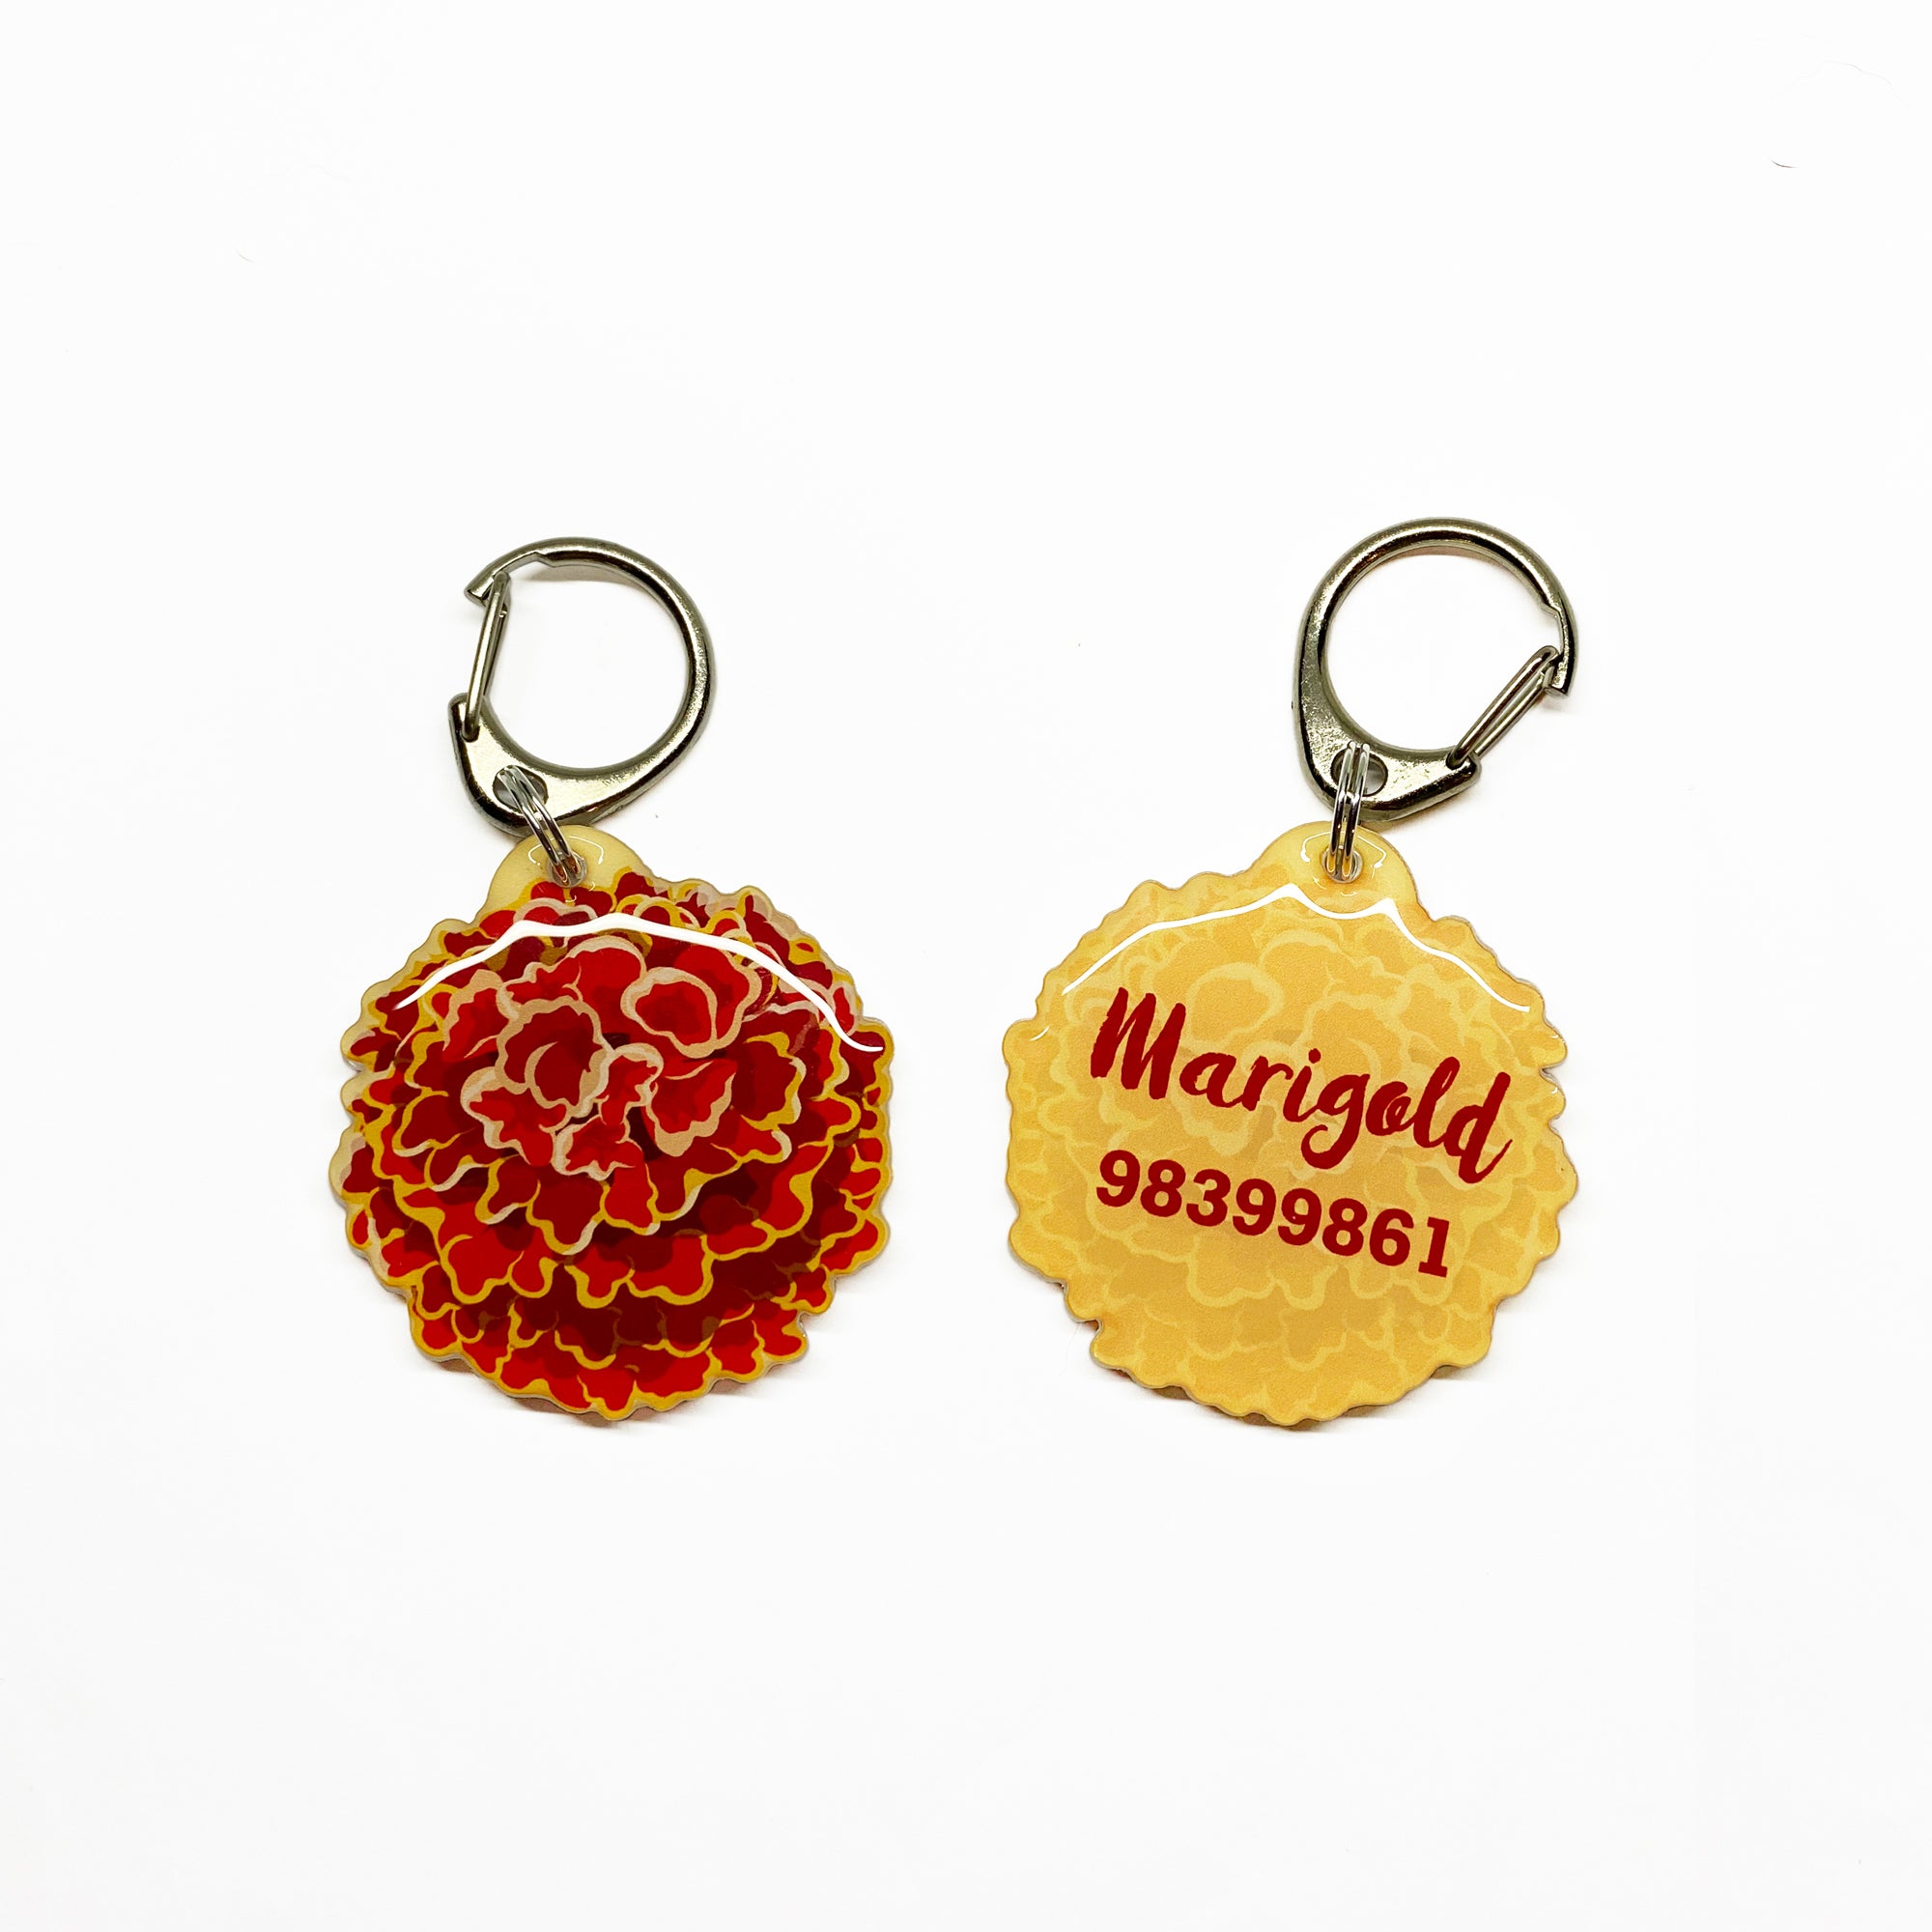 Red Marigold Pet ID Tags | Unique Pet ID Tags by Bashtags